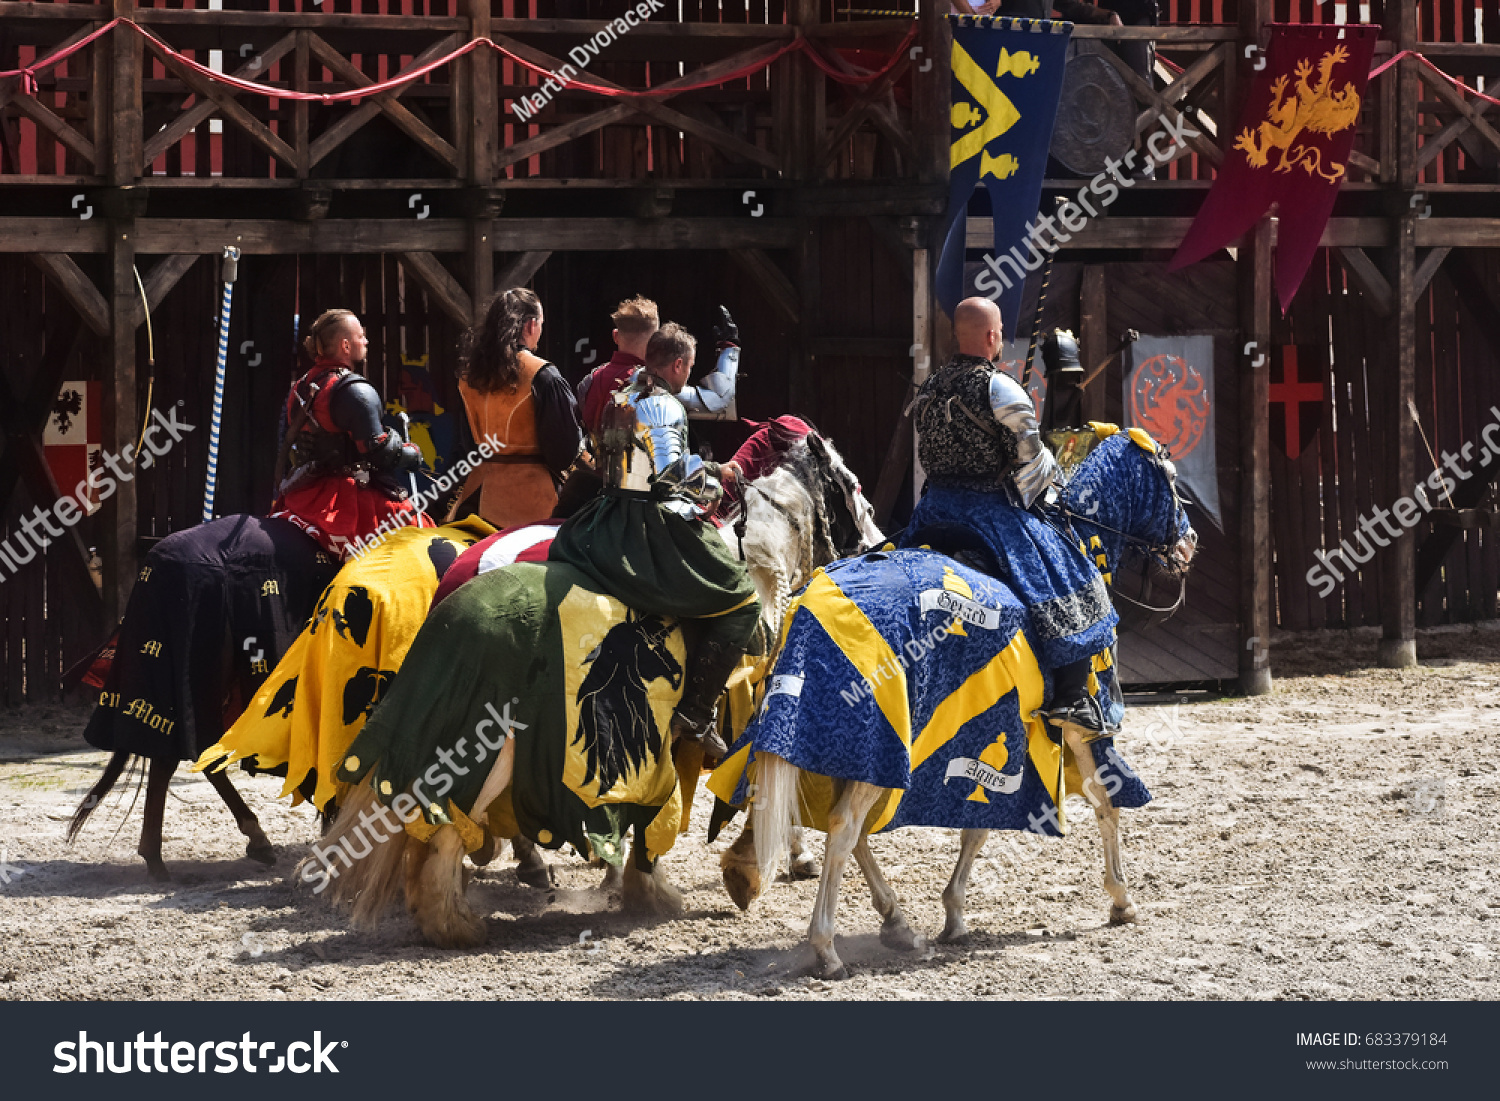 7 Practical Tactics to Turn jousting rules Into a Sales Machine